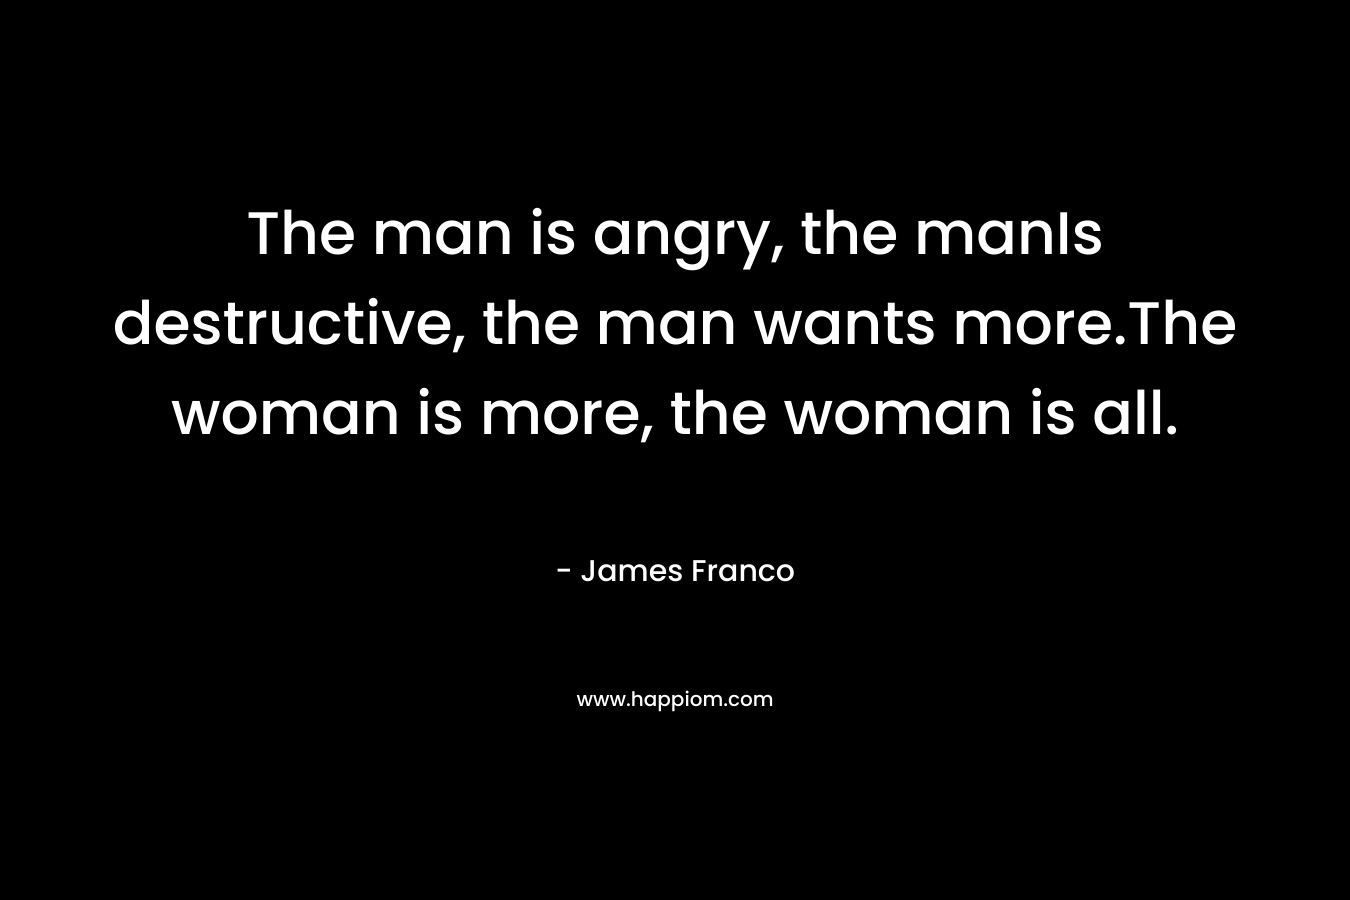 The man is angry, the manIs destructive, the man wants more.The woman is more, the woman is all. – James Franco